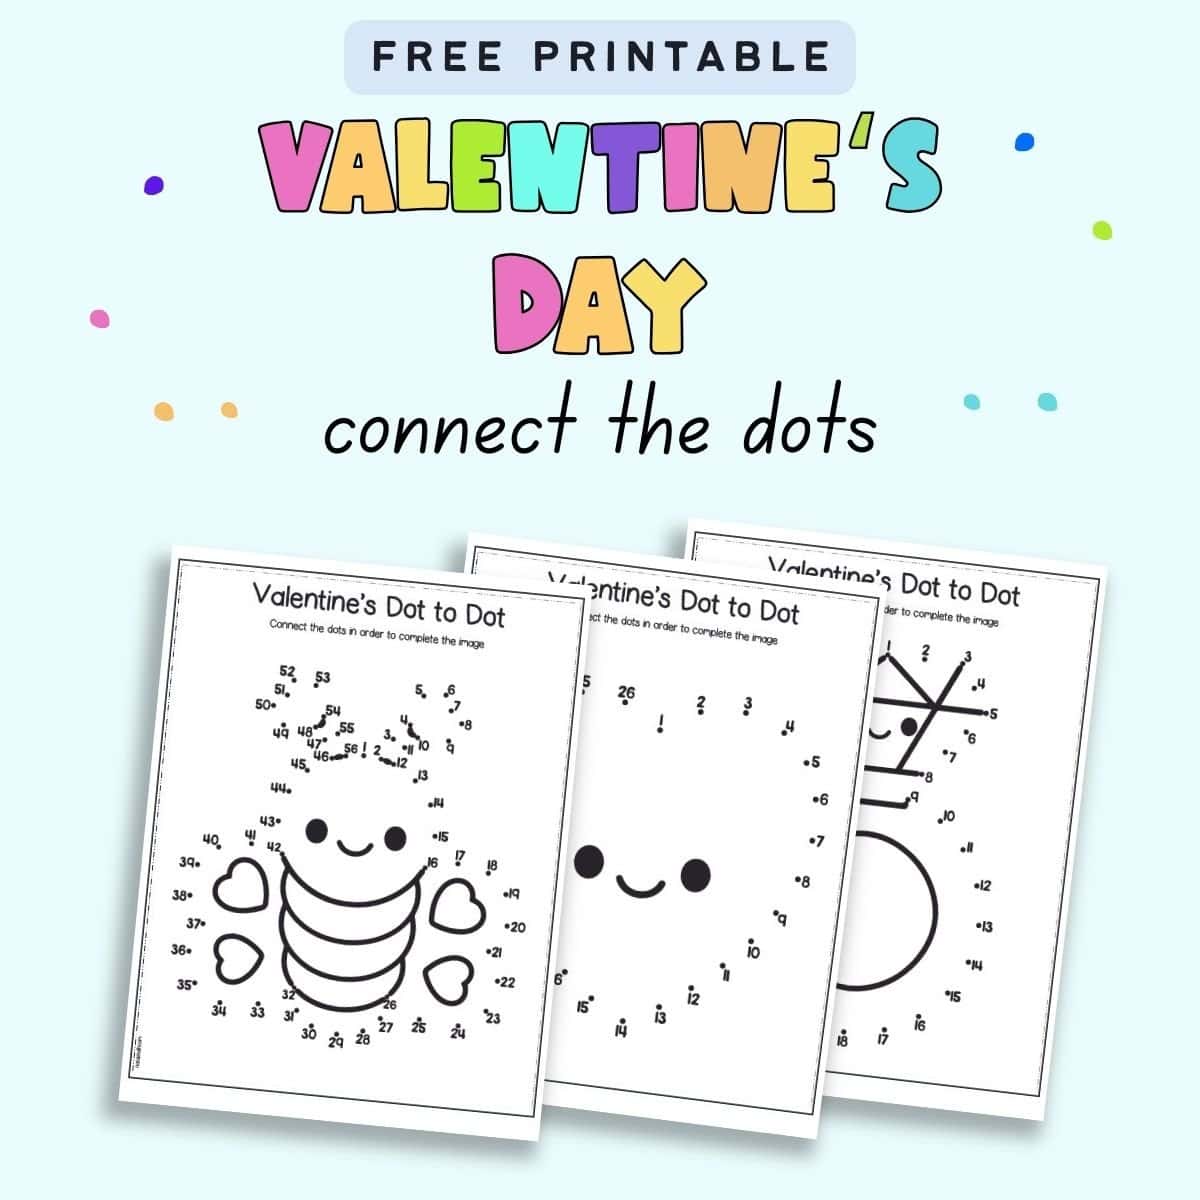 Text "free printable Valentine's Day connect the dots" with a  preview of three sheets of dot to dot printables